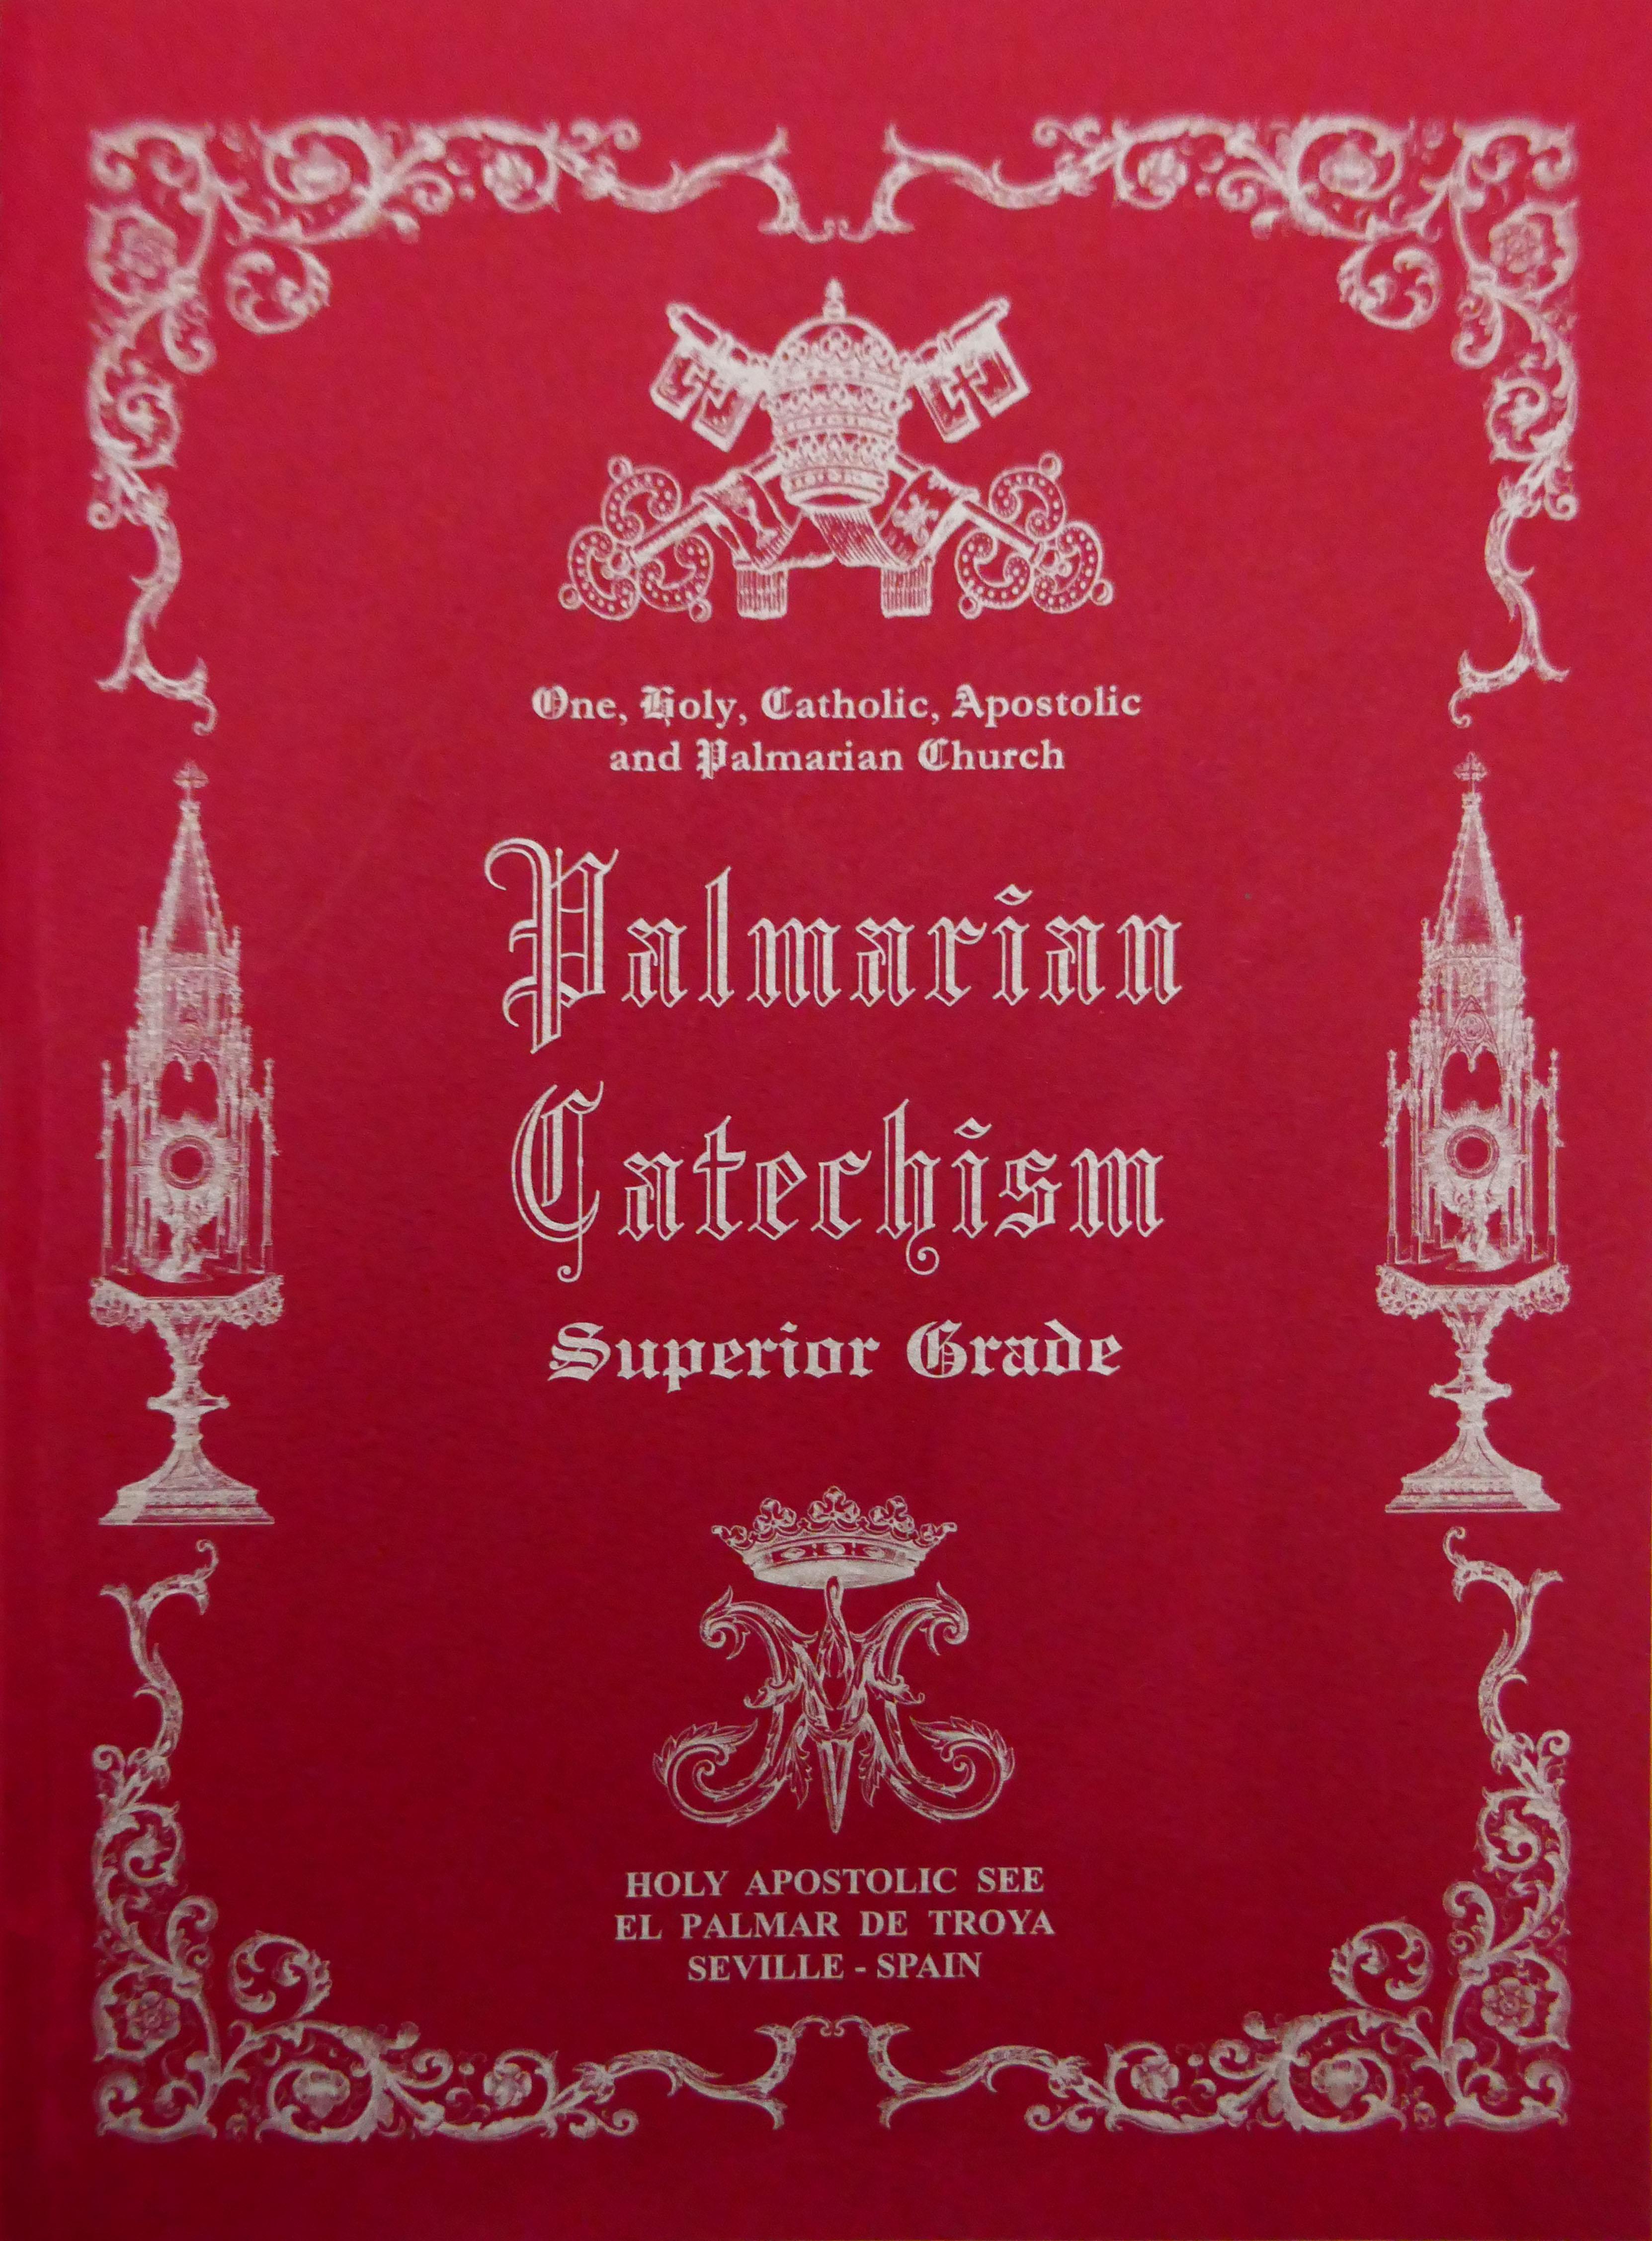 <a href="https://www.bisericapalmariana.org/wp-content/uploads/2019/03/Extracts-from-the-Palmarian-Catechism.pdf" title="Extracts from the Palmarian Catechism">Extracts from the Palmarian Catechism  <br> <br>Vedeți mai departe</a>